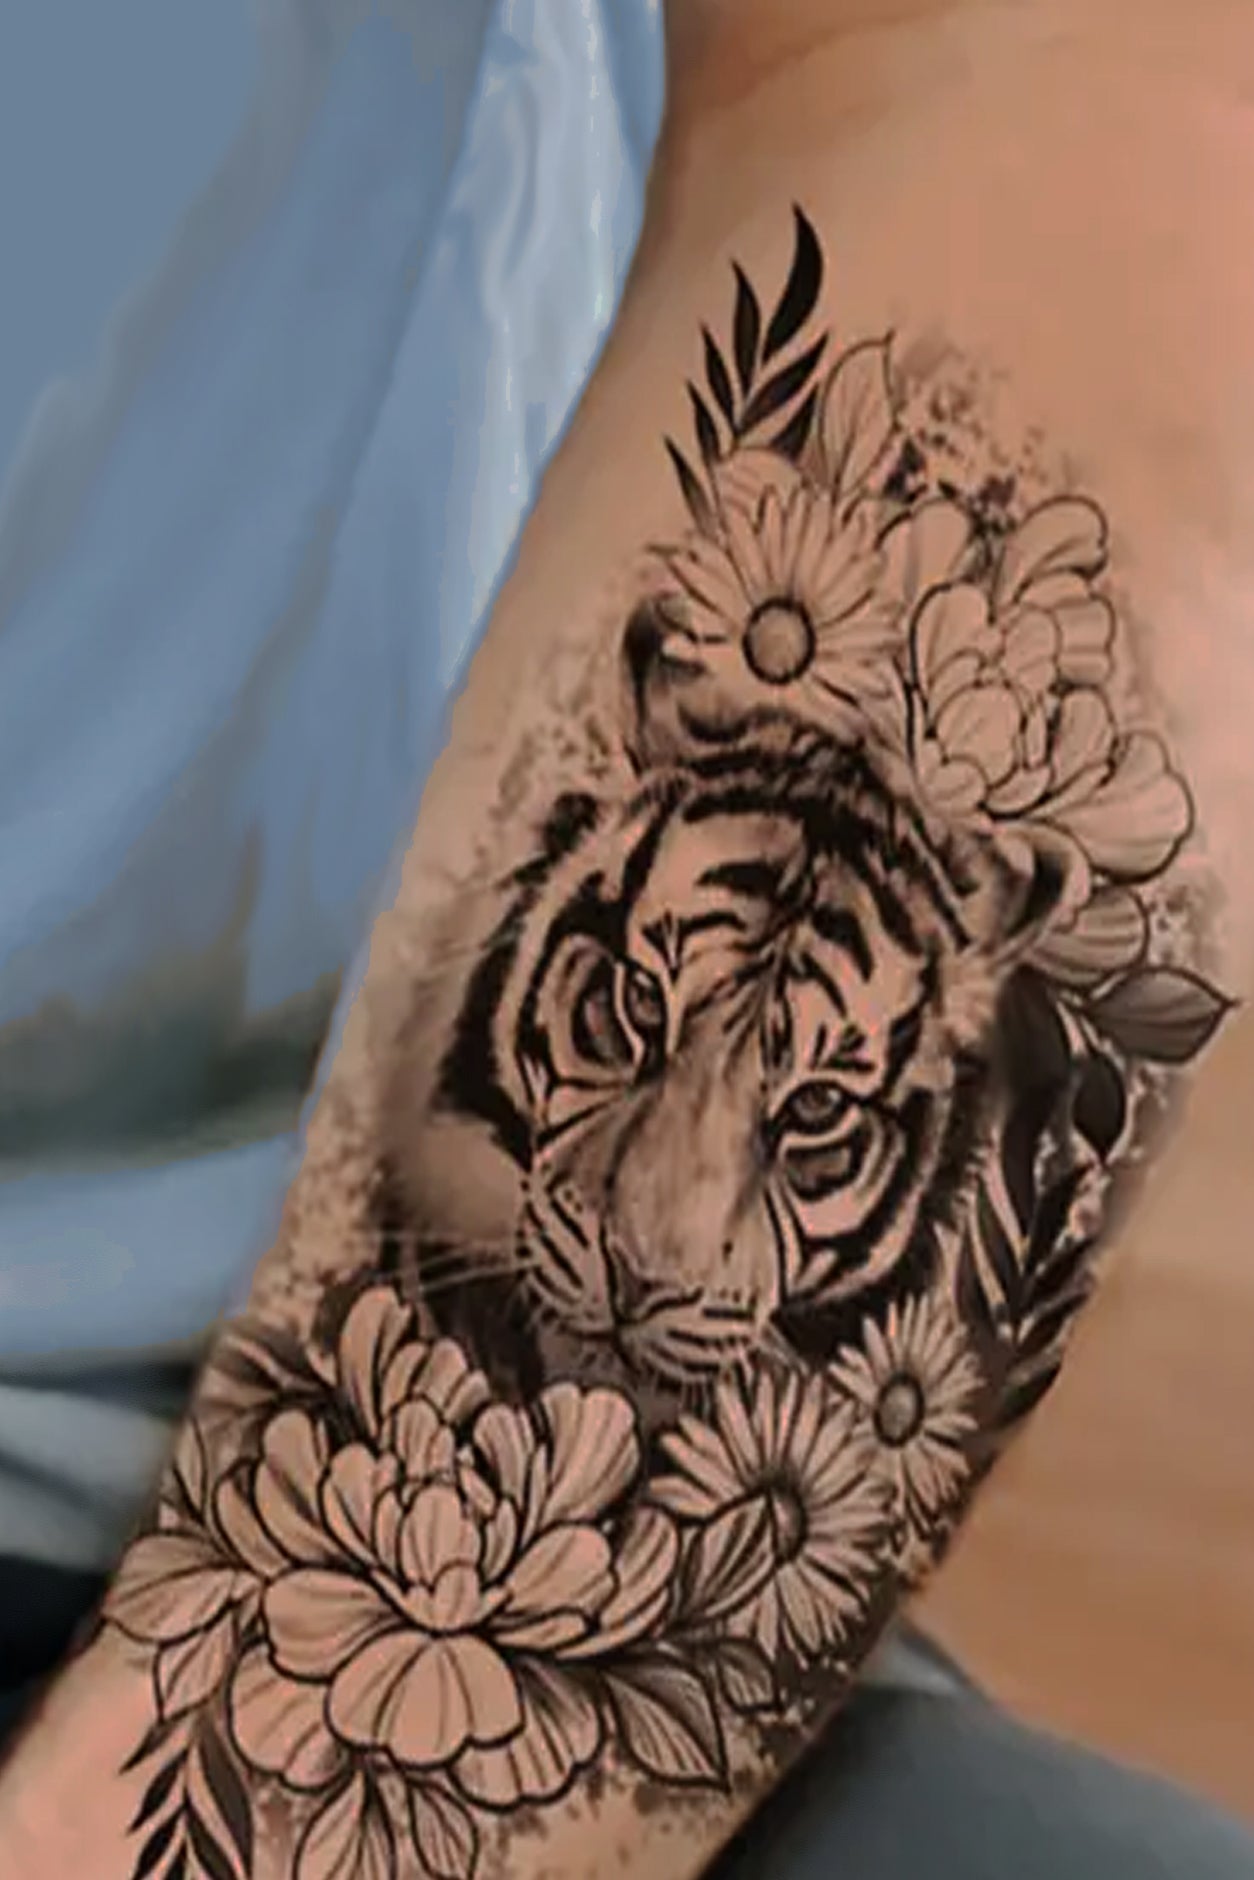 A gender neutral arm displays the tiger surrounded by daisy flowers and peonies, in a black ink realistic tattoo.